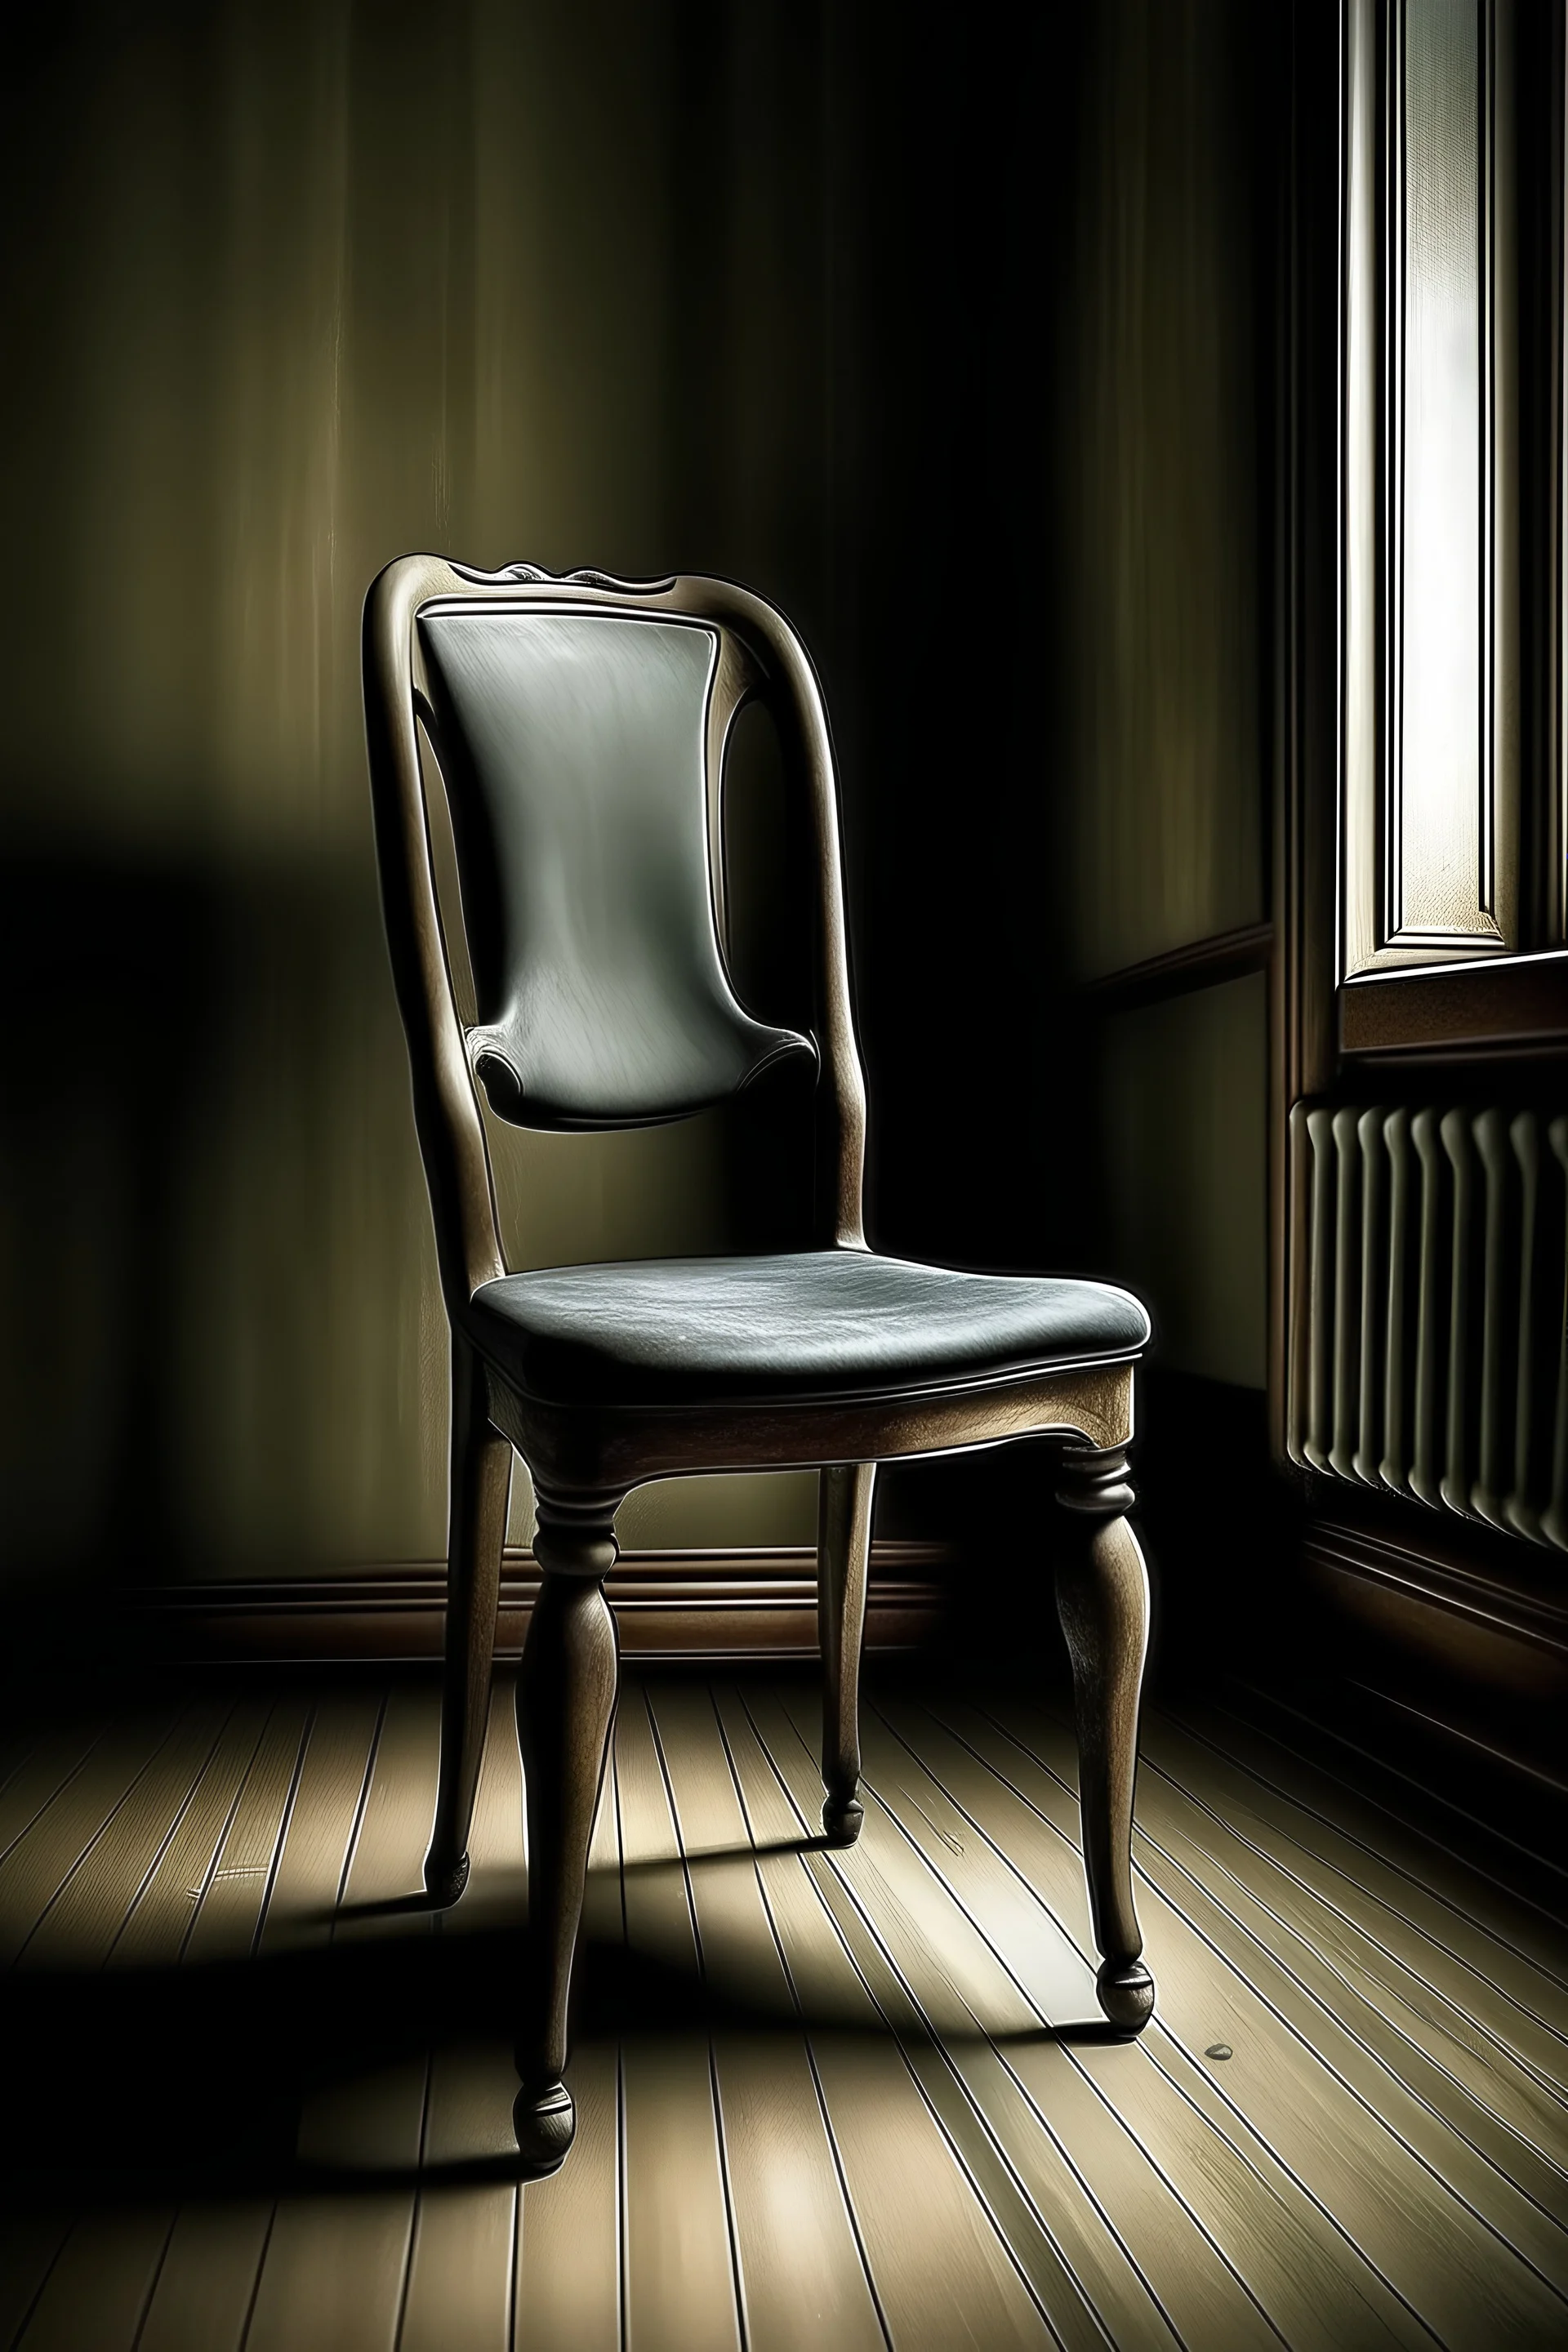 I want a picture of an empty chair in the middle of the picture, with a cultural and artistic character, pointed at the front camera